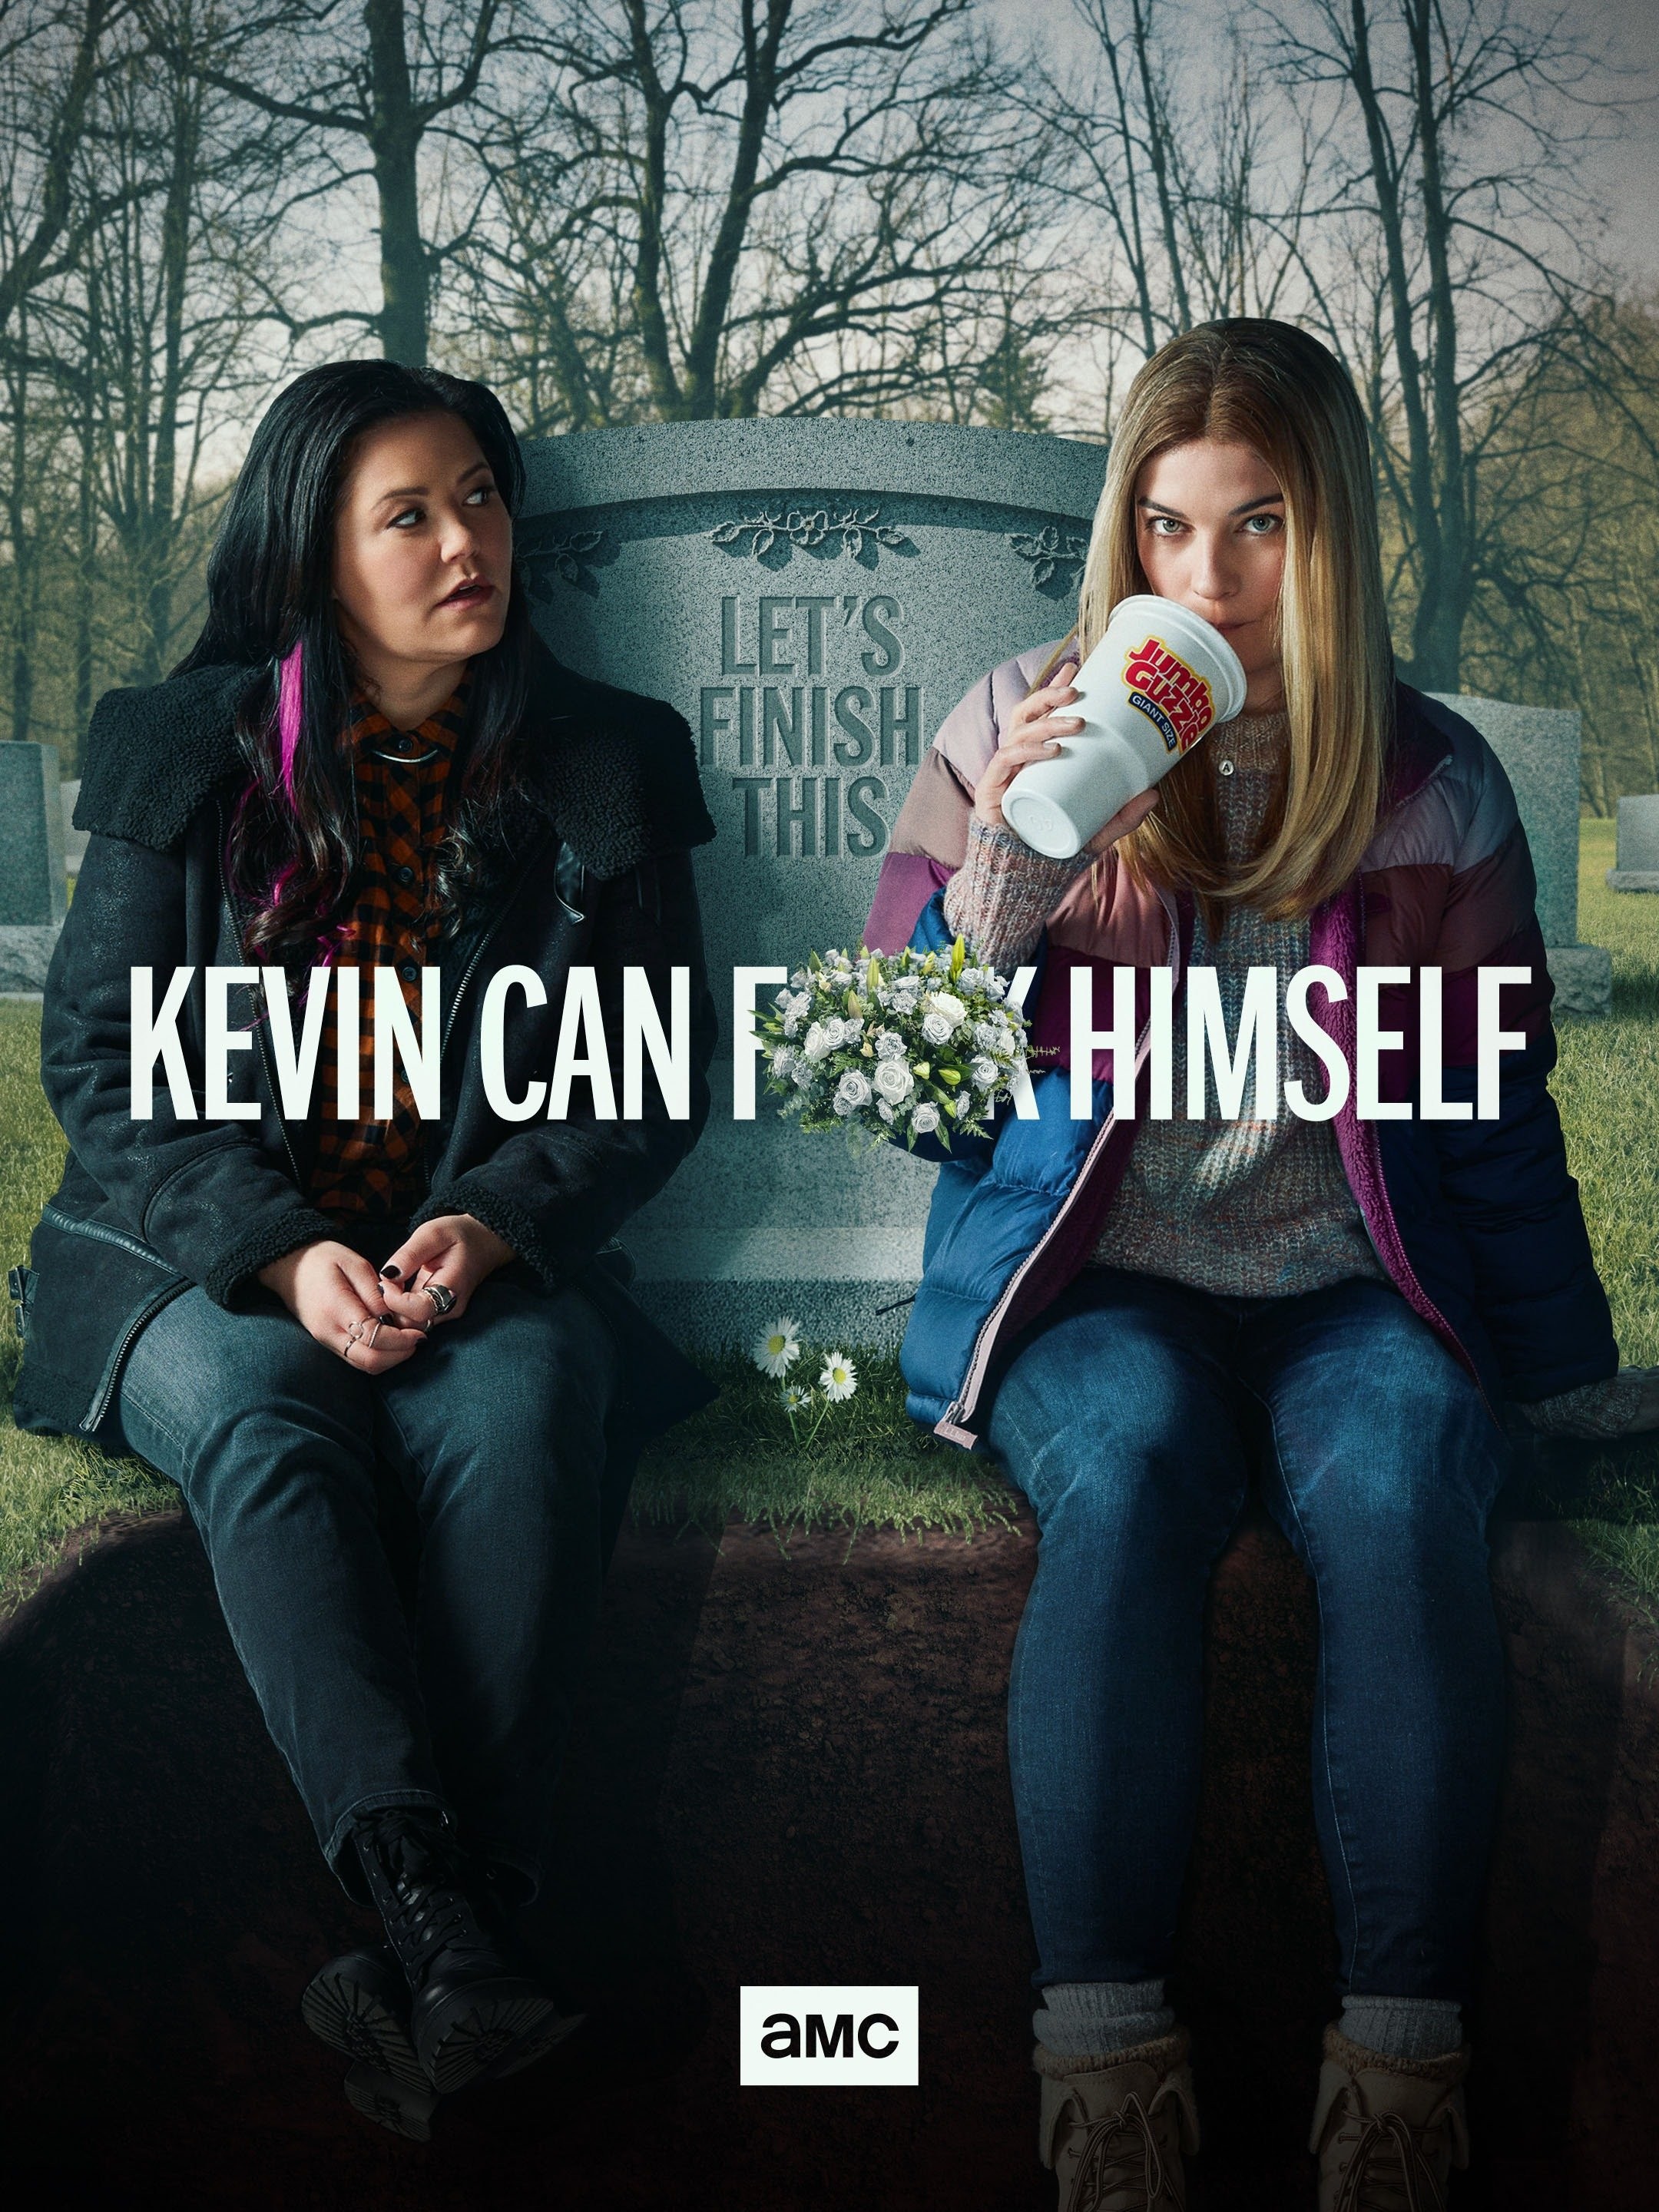 Kevin Can F**k Himself' Sets Premiere Date for June 13th